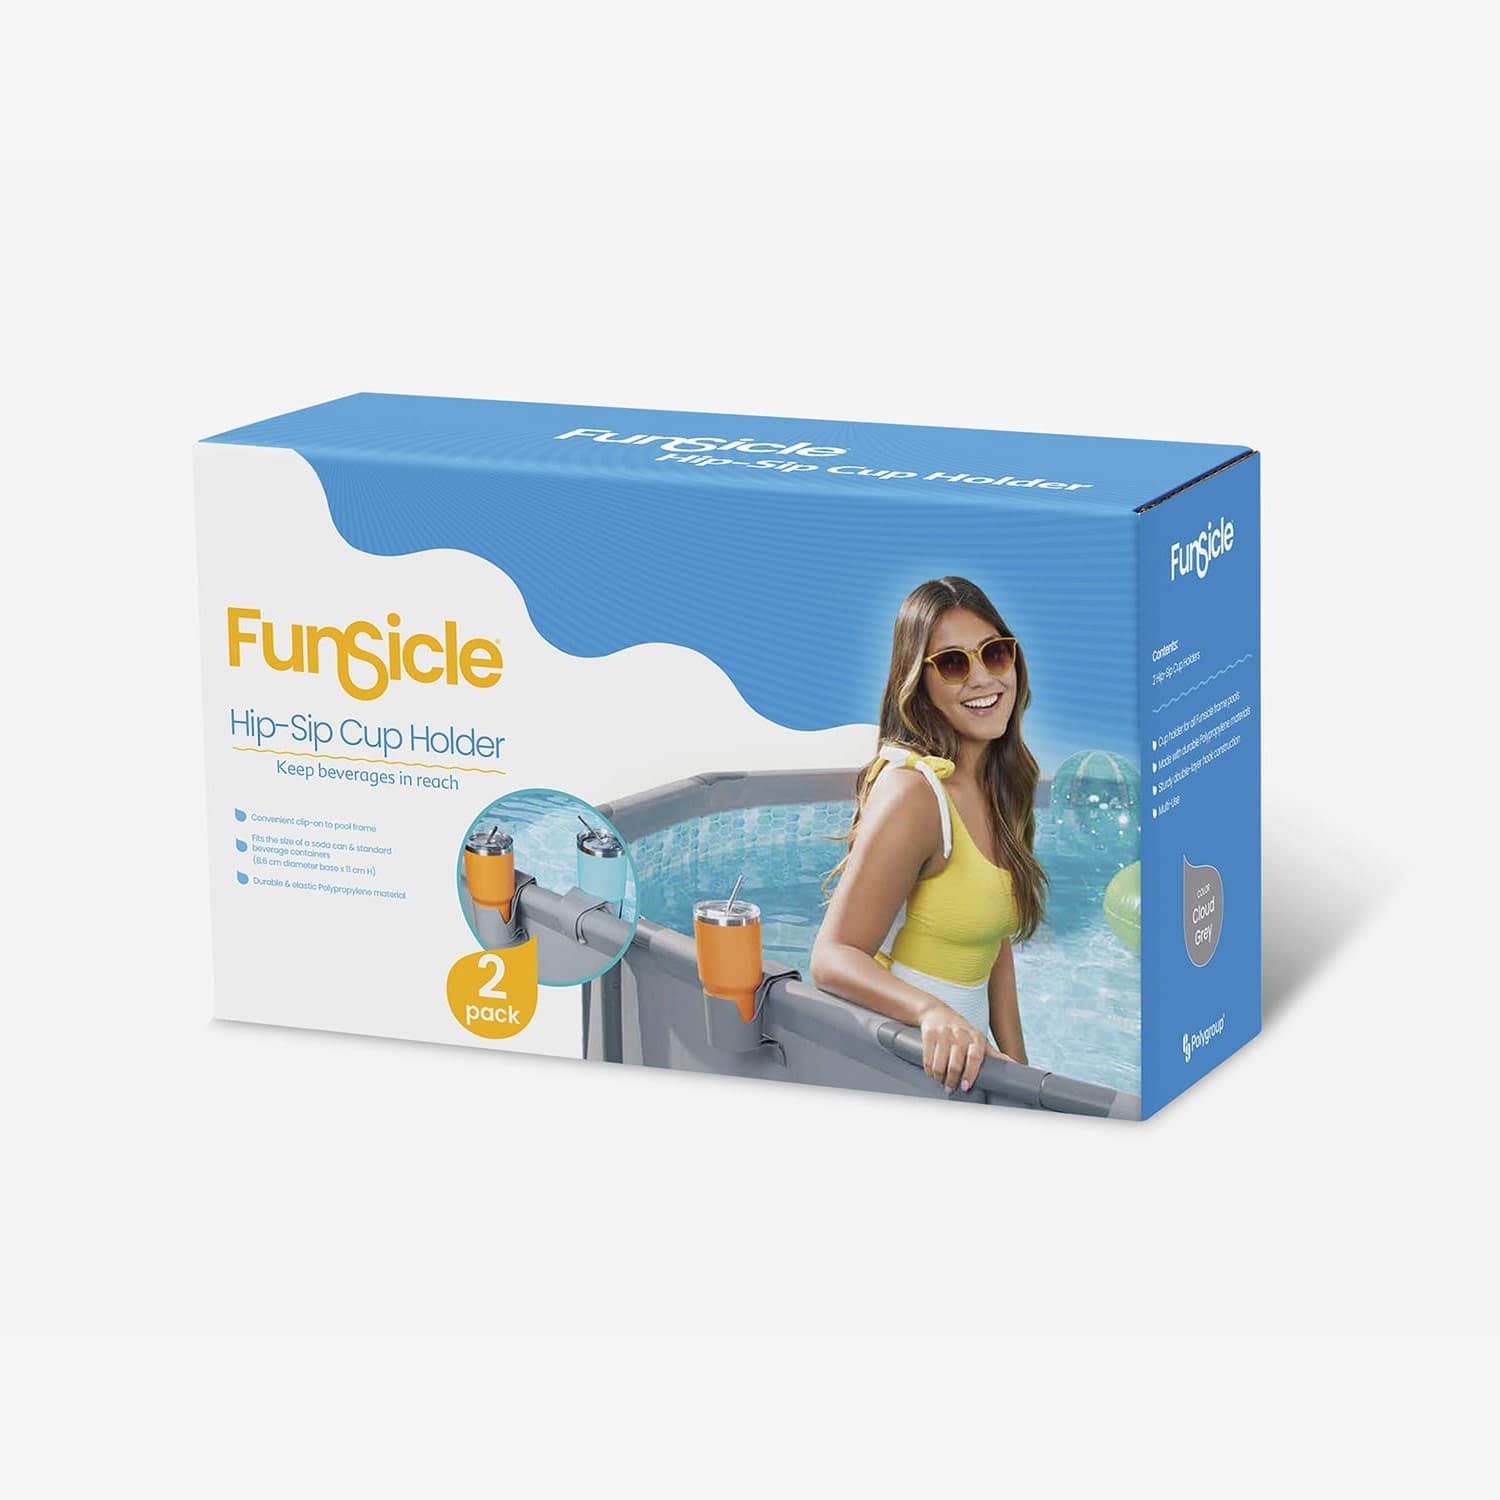 Funsicle Hip-Sip Cup Holder (2-pack) packaging box